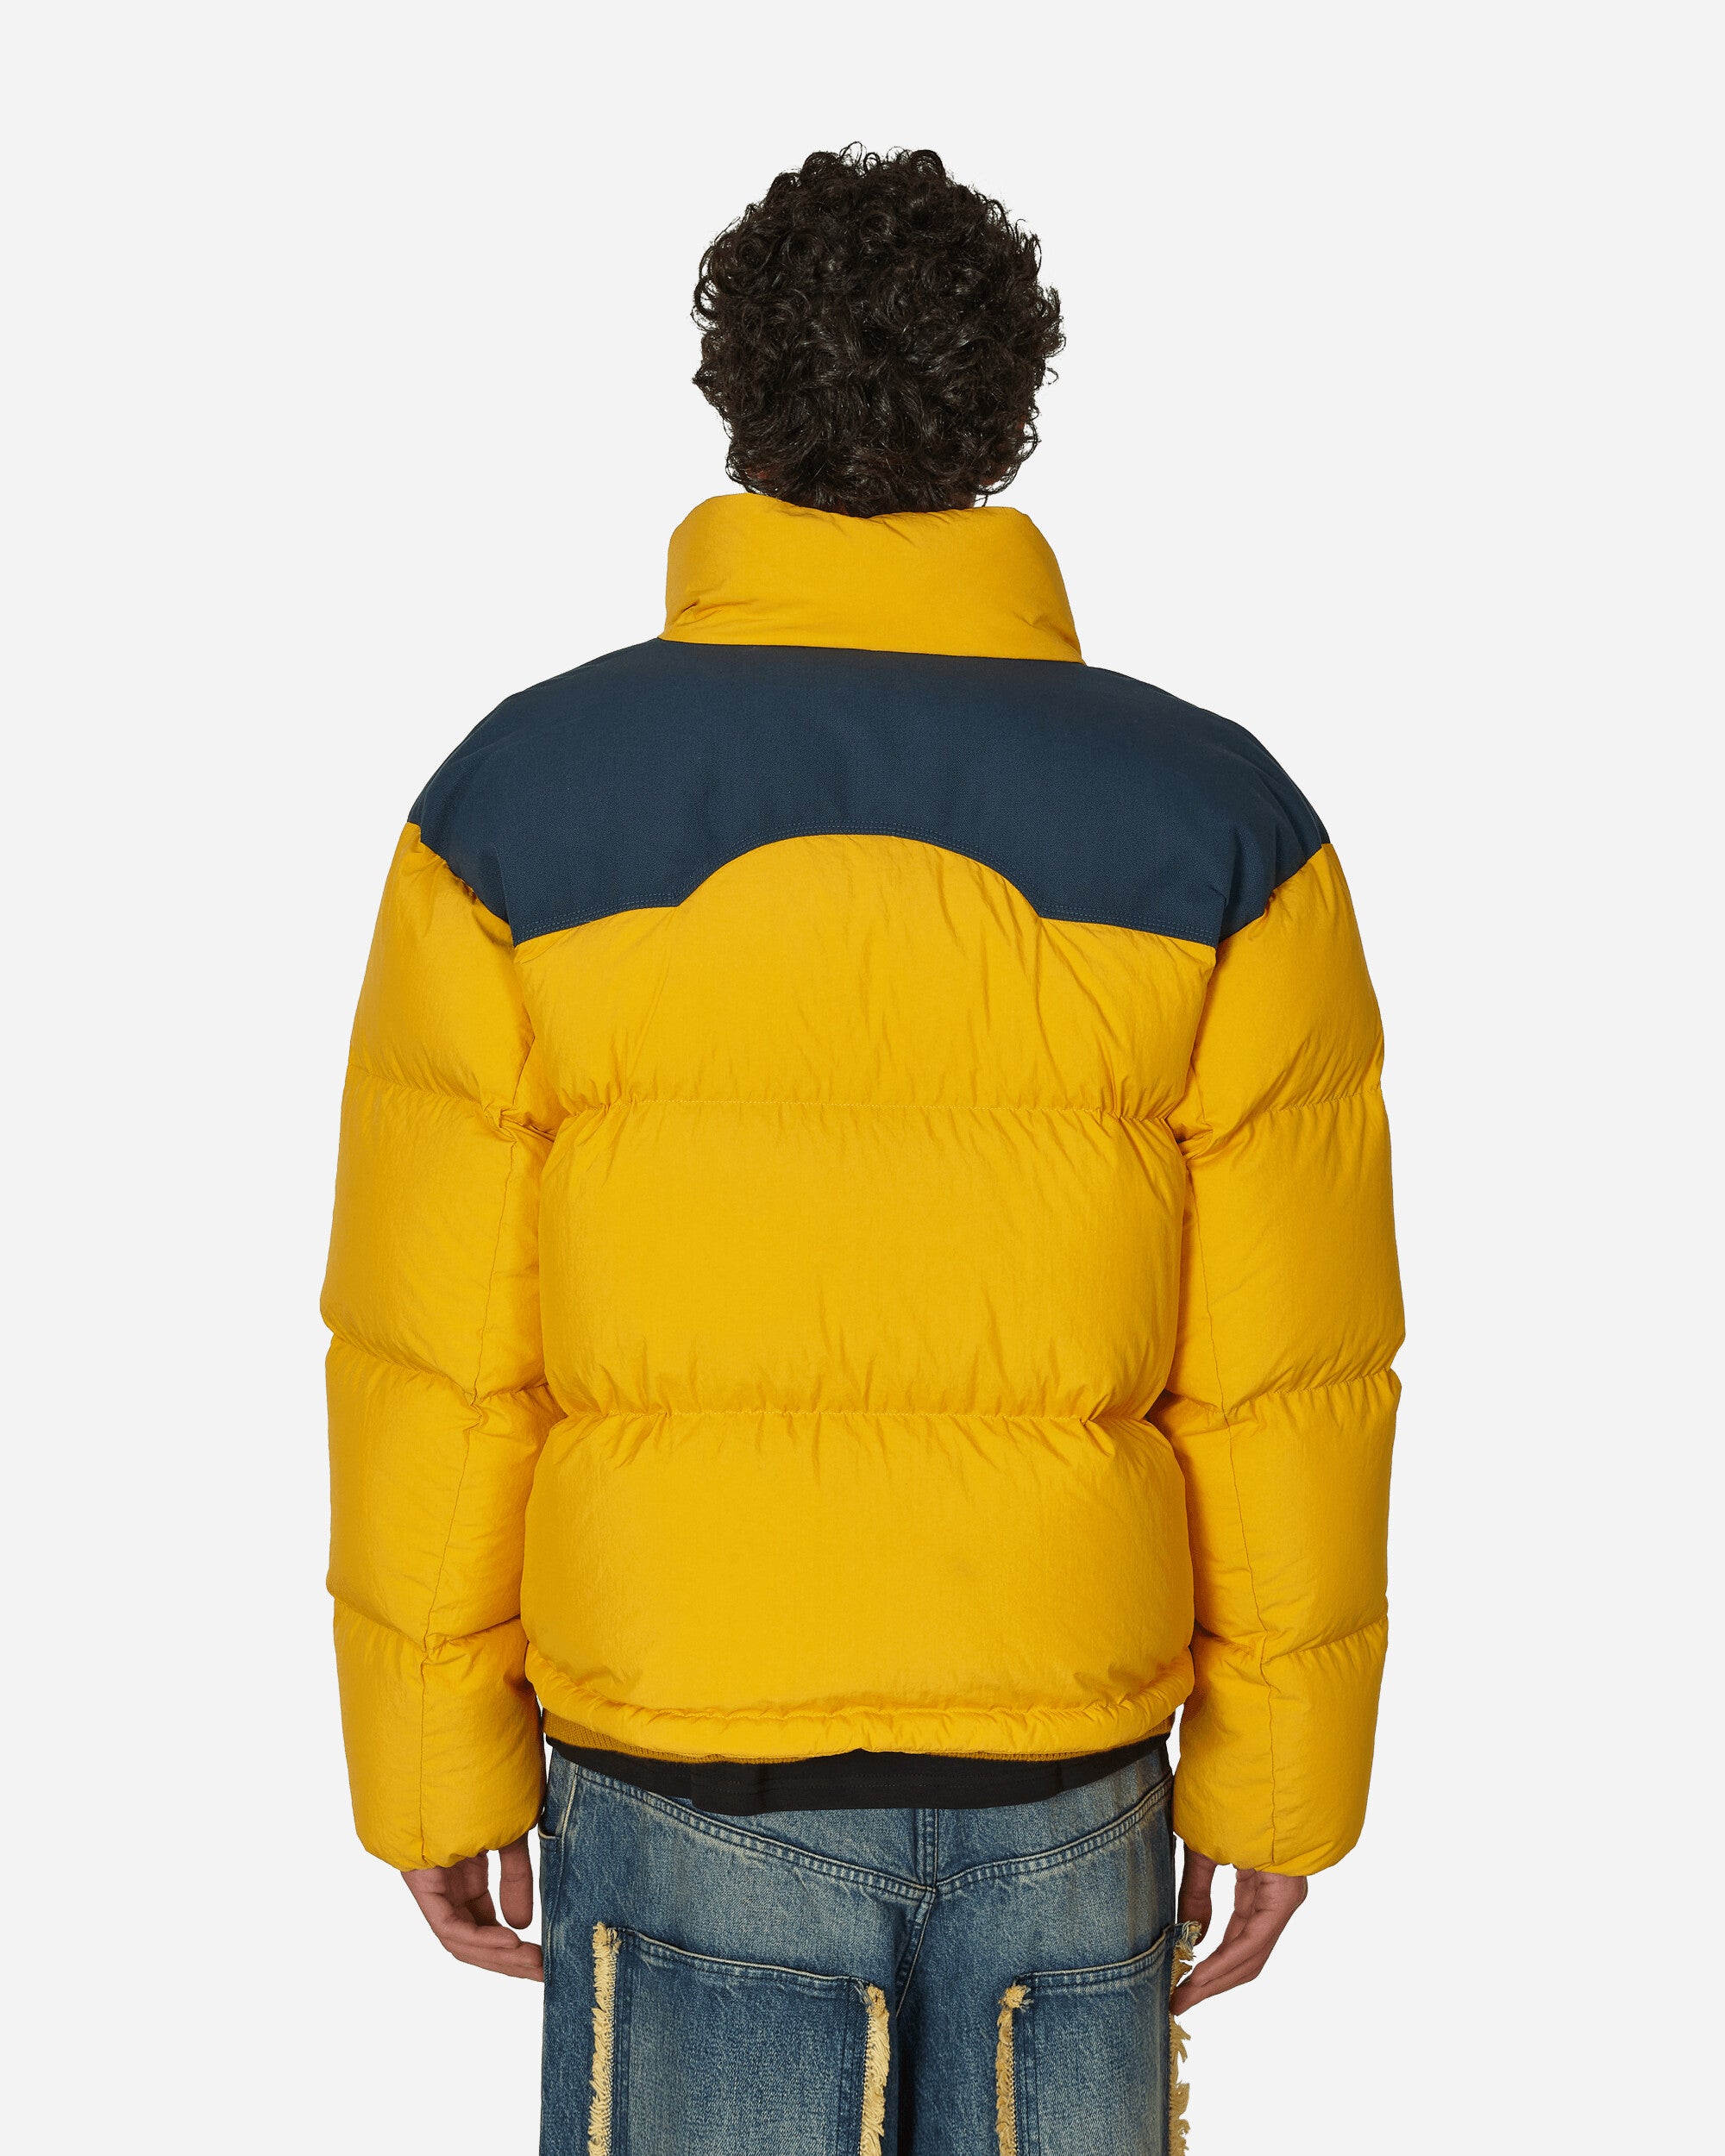 Moncler Genius Nevis Jacket X Palm Angels Yellow Coats and Jackets Down Jackets 1A00017M3377 F17